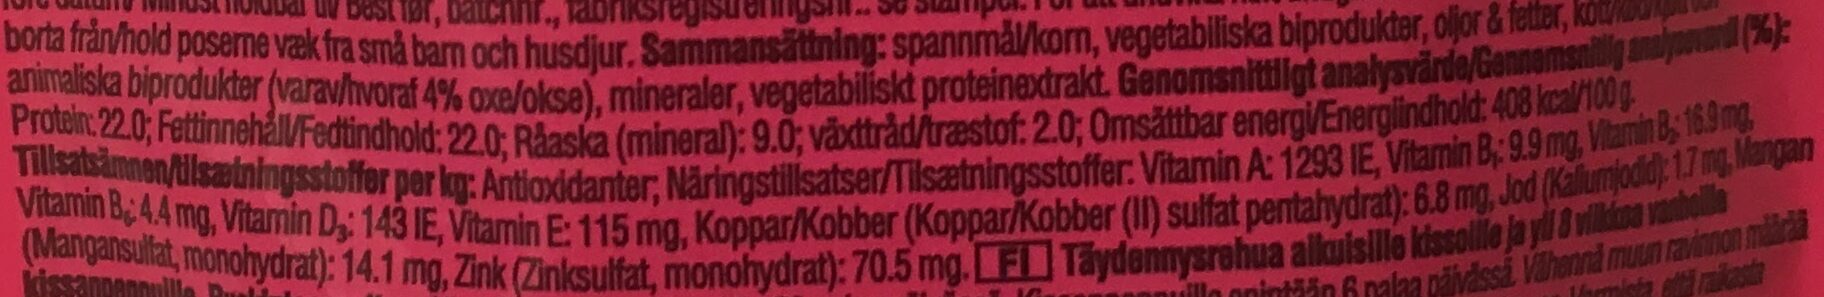 Dreamies med okse - Nutrition facts - nb